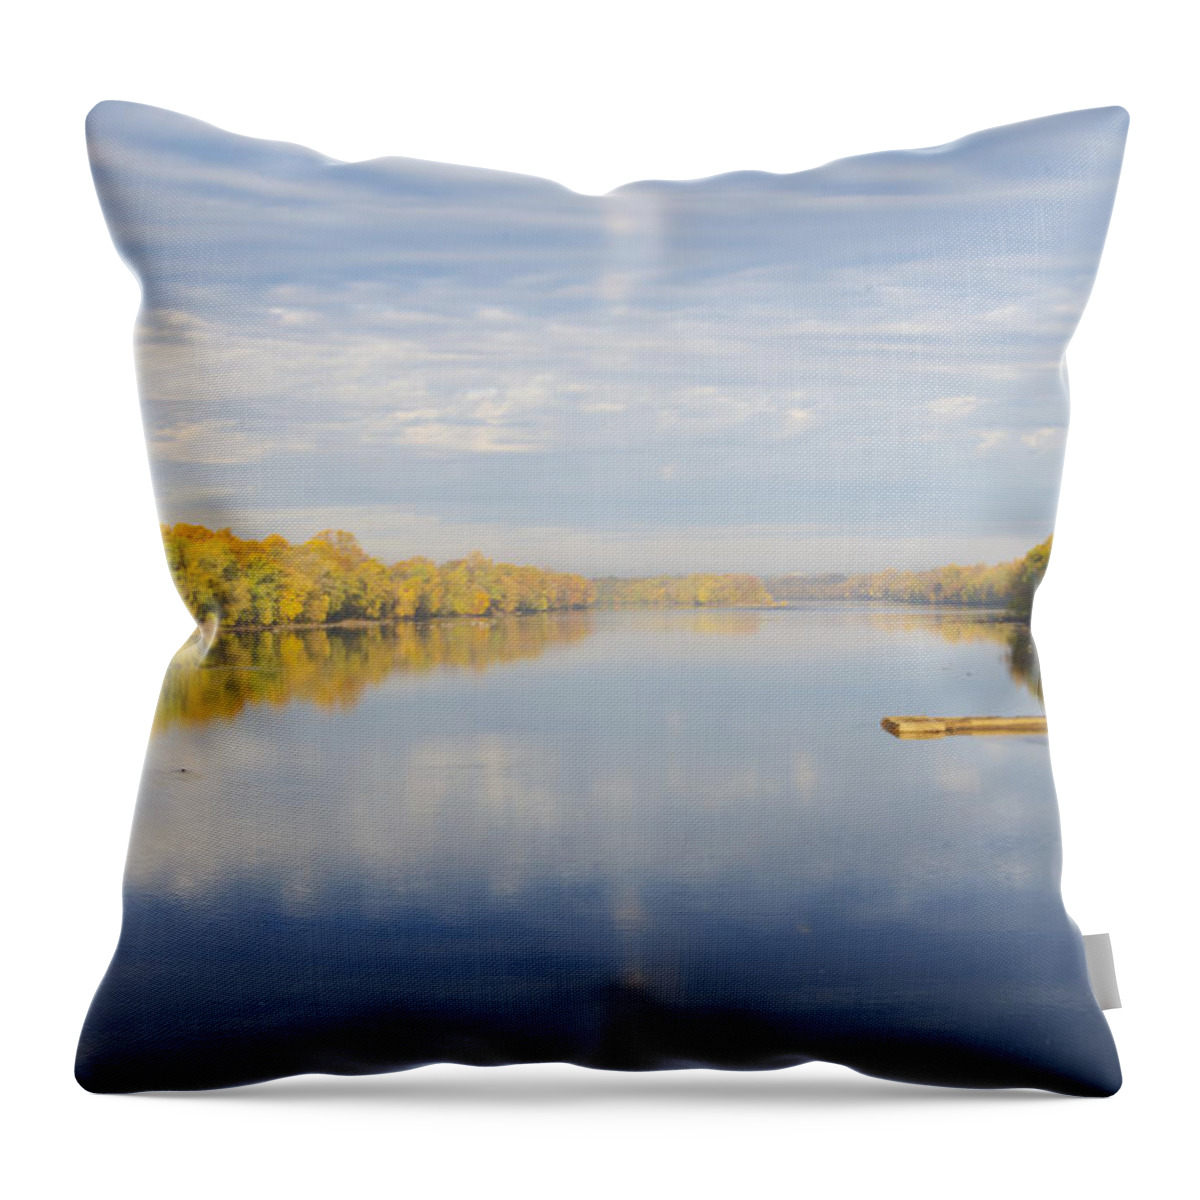 Delaware Throw Pillow featuring the photograph Delaware River at Morrisville - Trenton by Bill Cannon